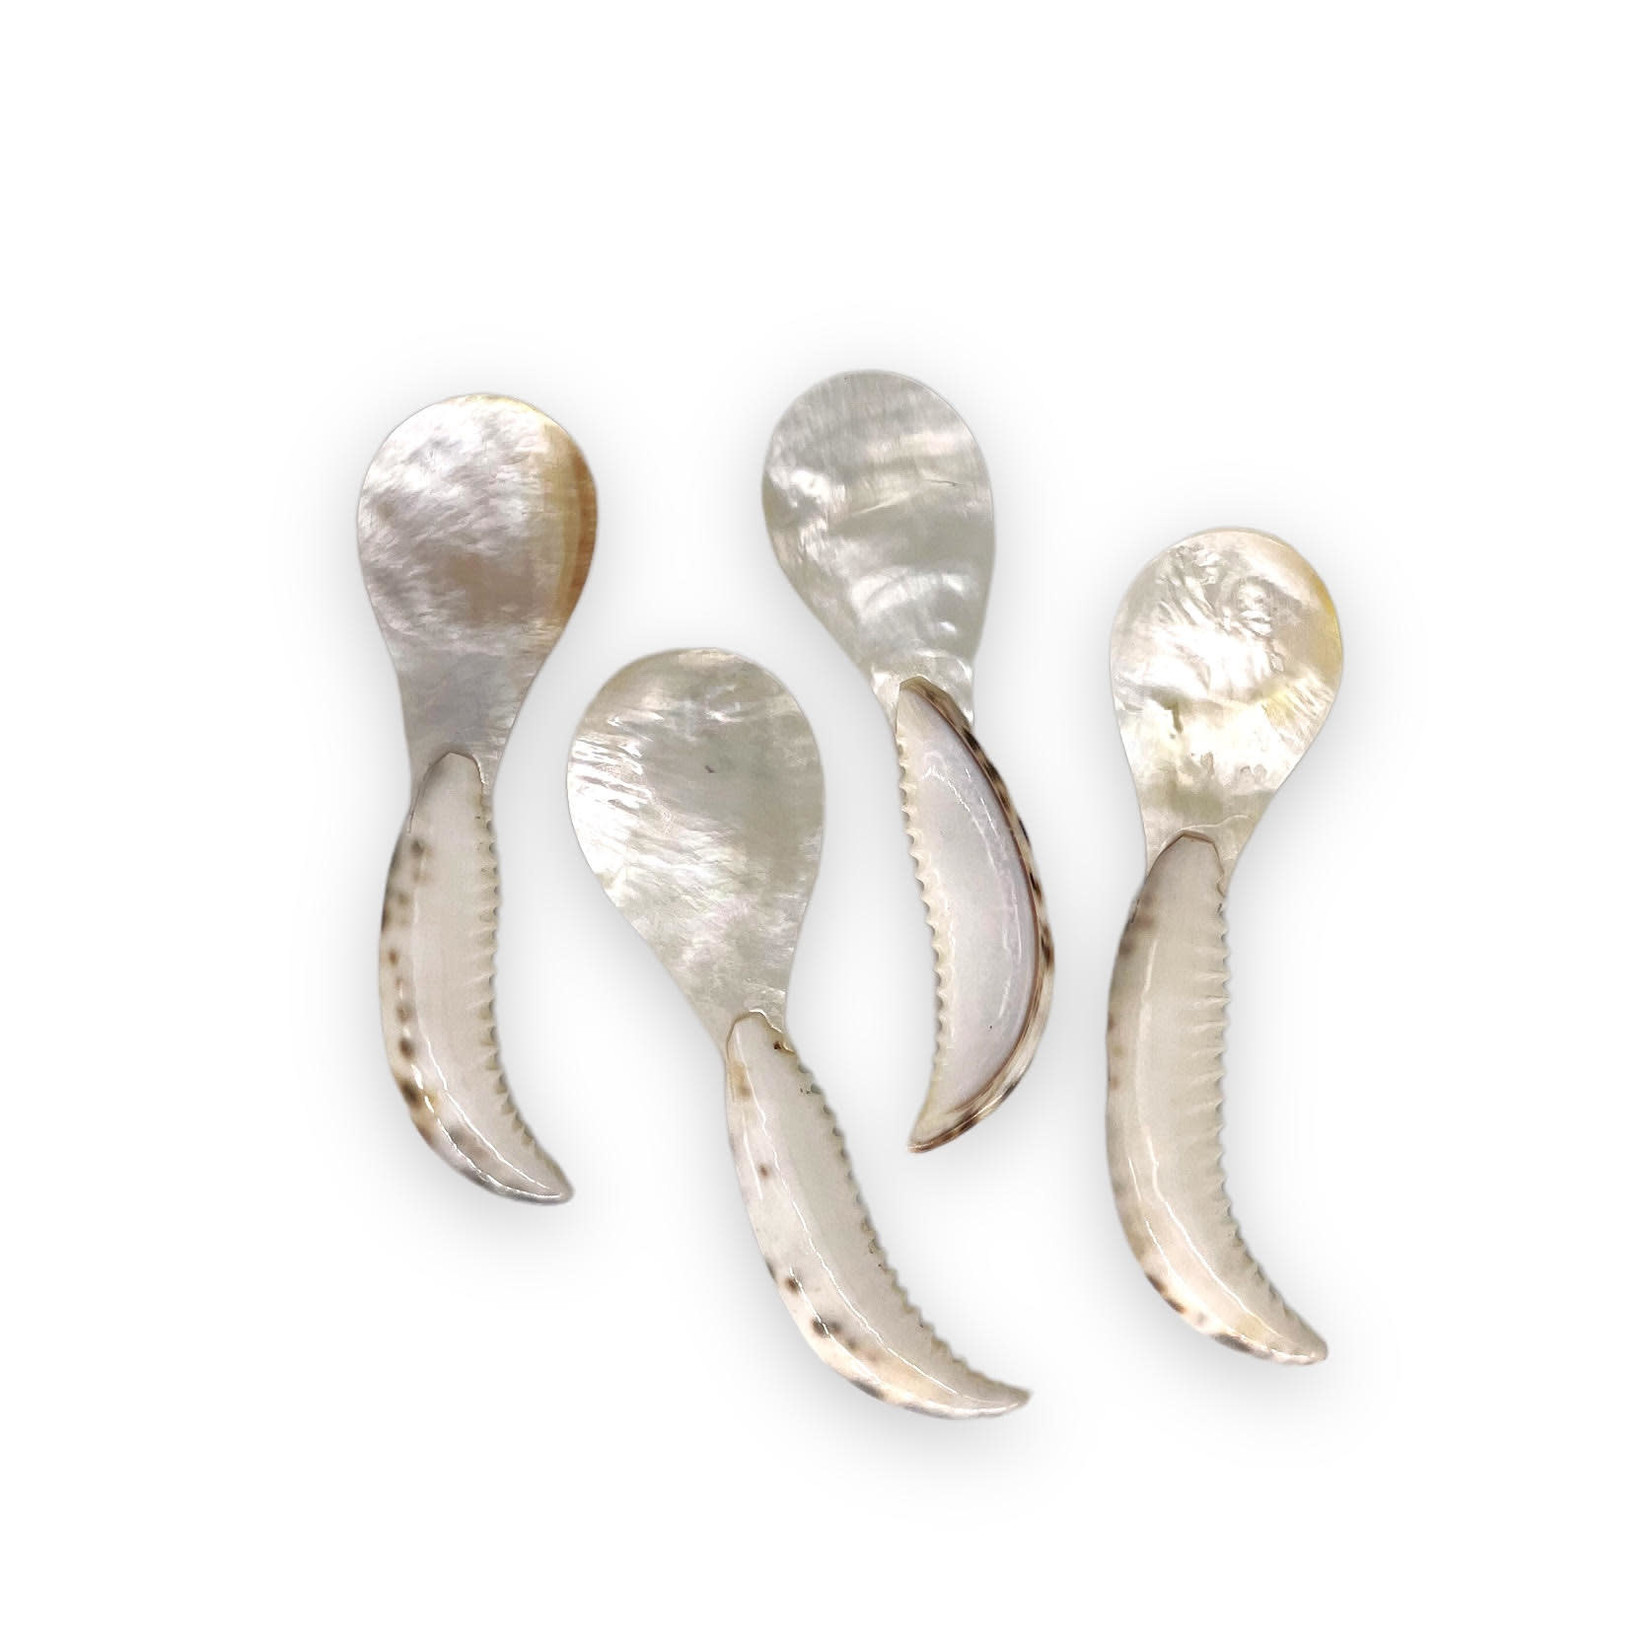 Handmade Mother of Pearl Spoon with Cowry Claw Handle, Set of 4